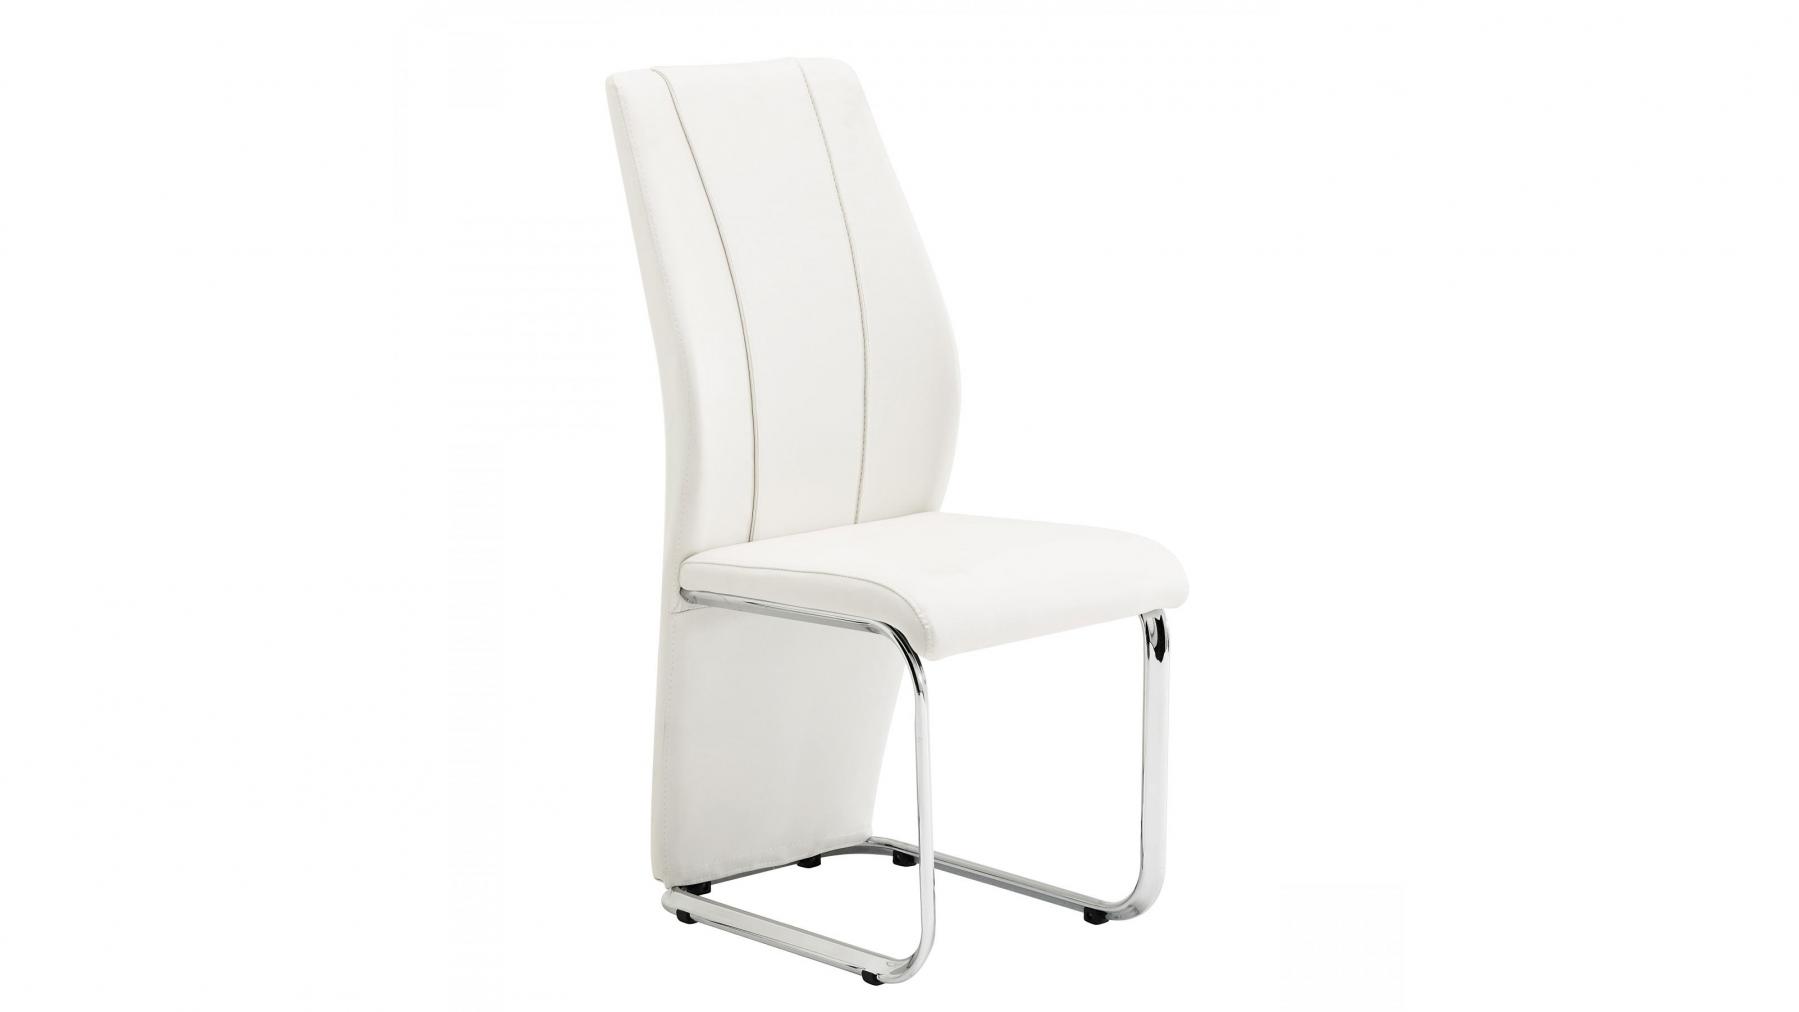 Santorini Dining Chair Harvey, Harvey Norman Faux Leather Dining Chairs